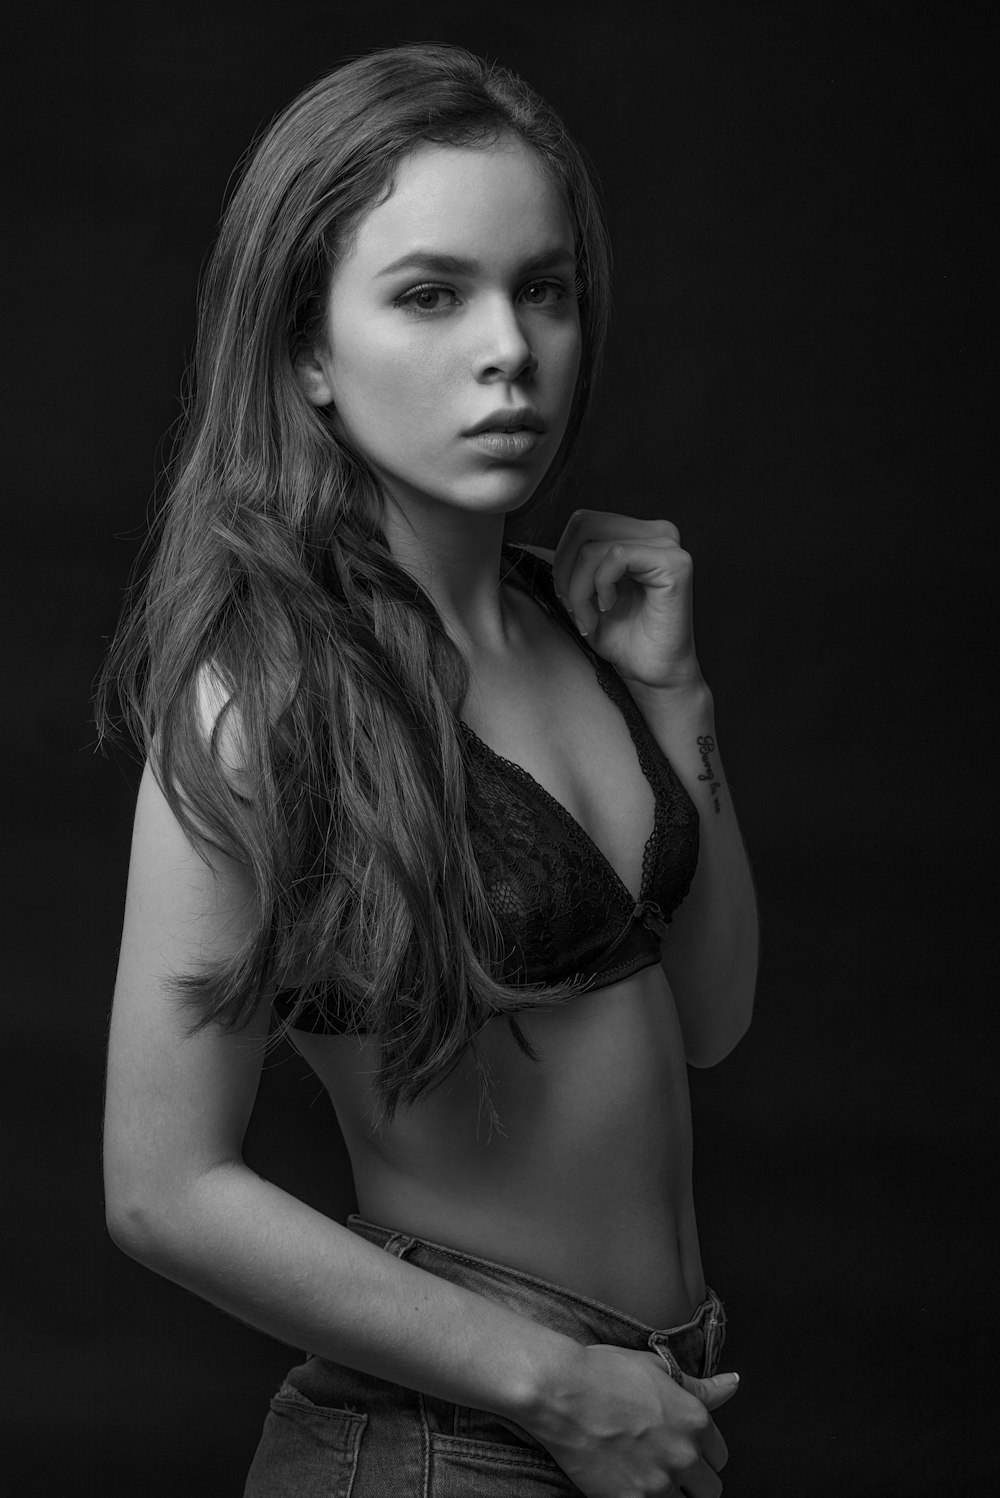 grayscale photography of woman wearing brassiere